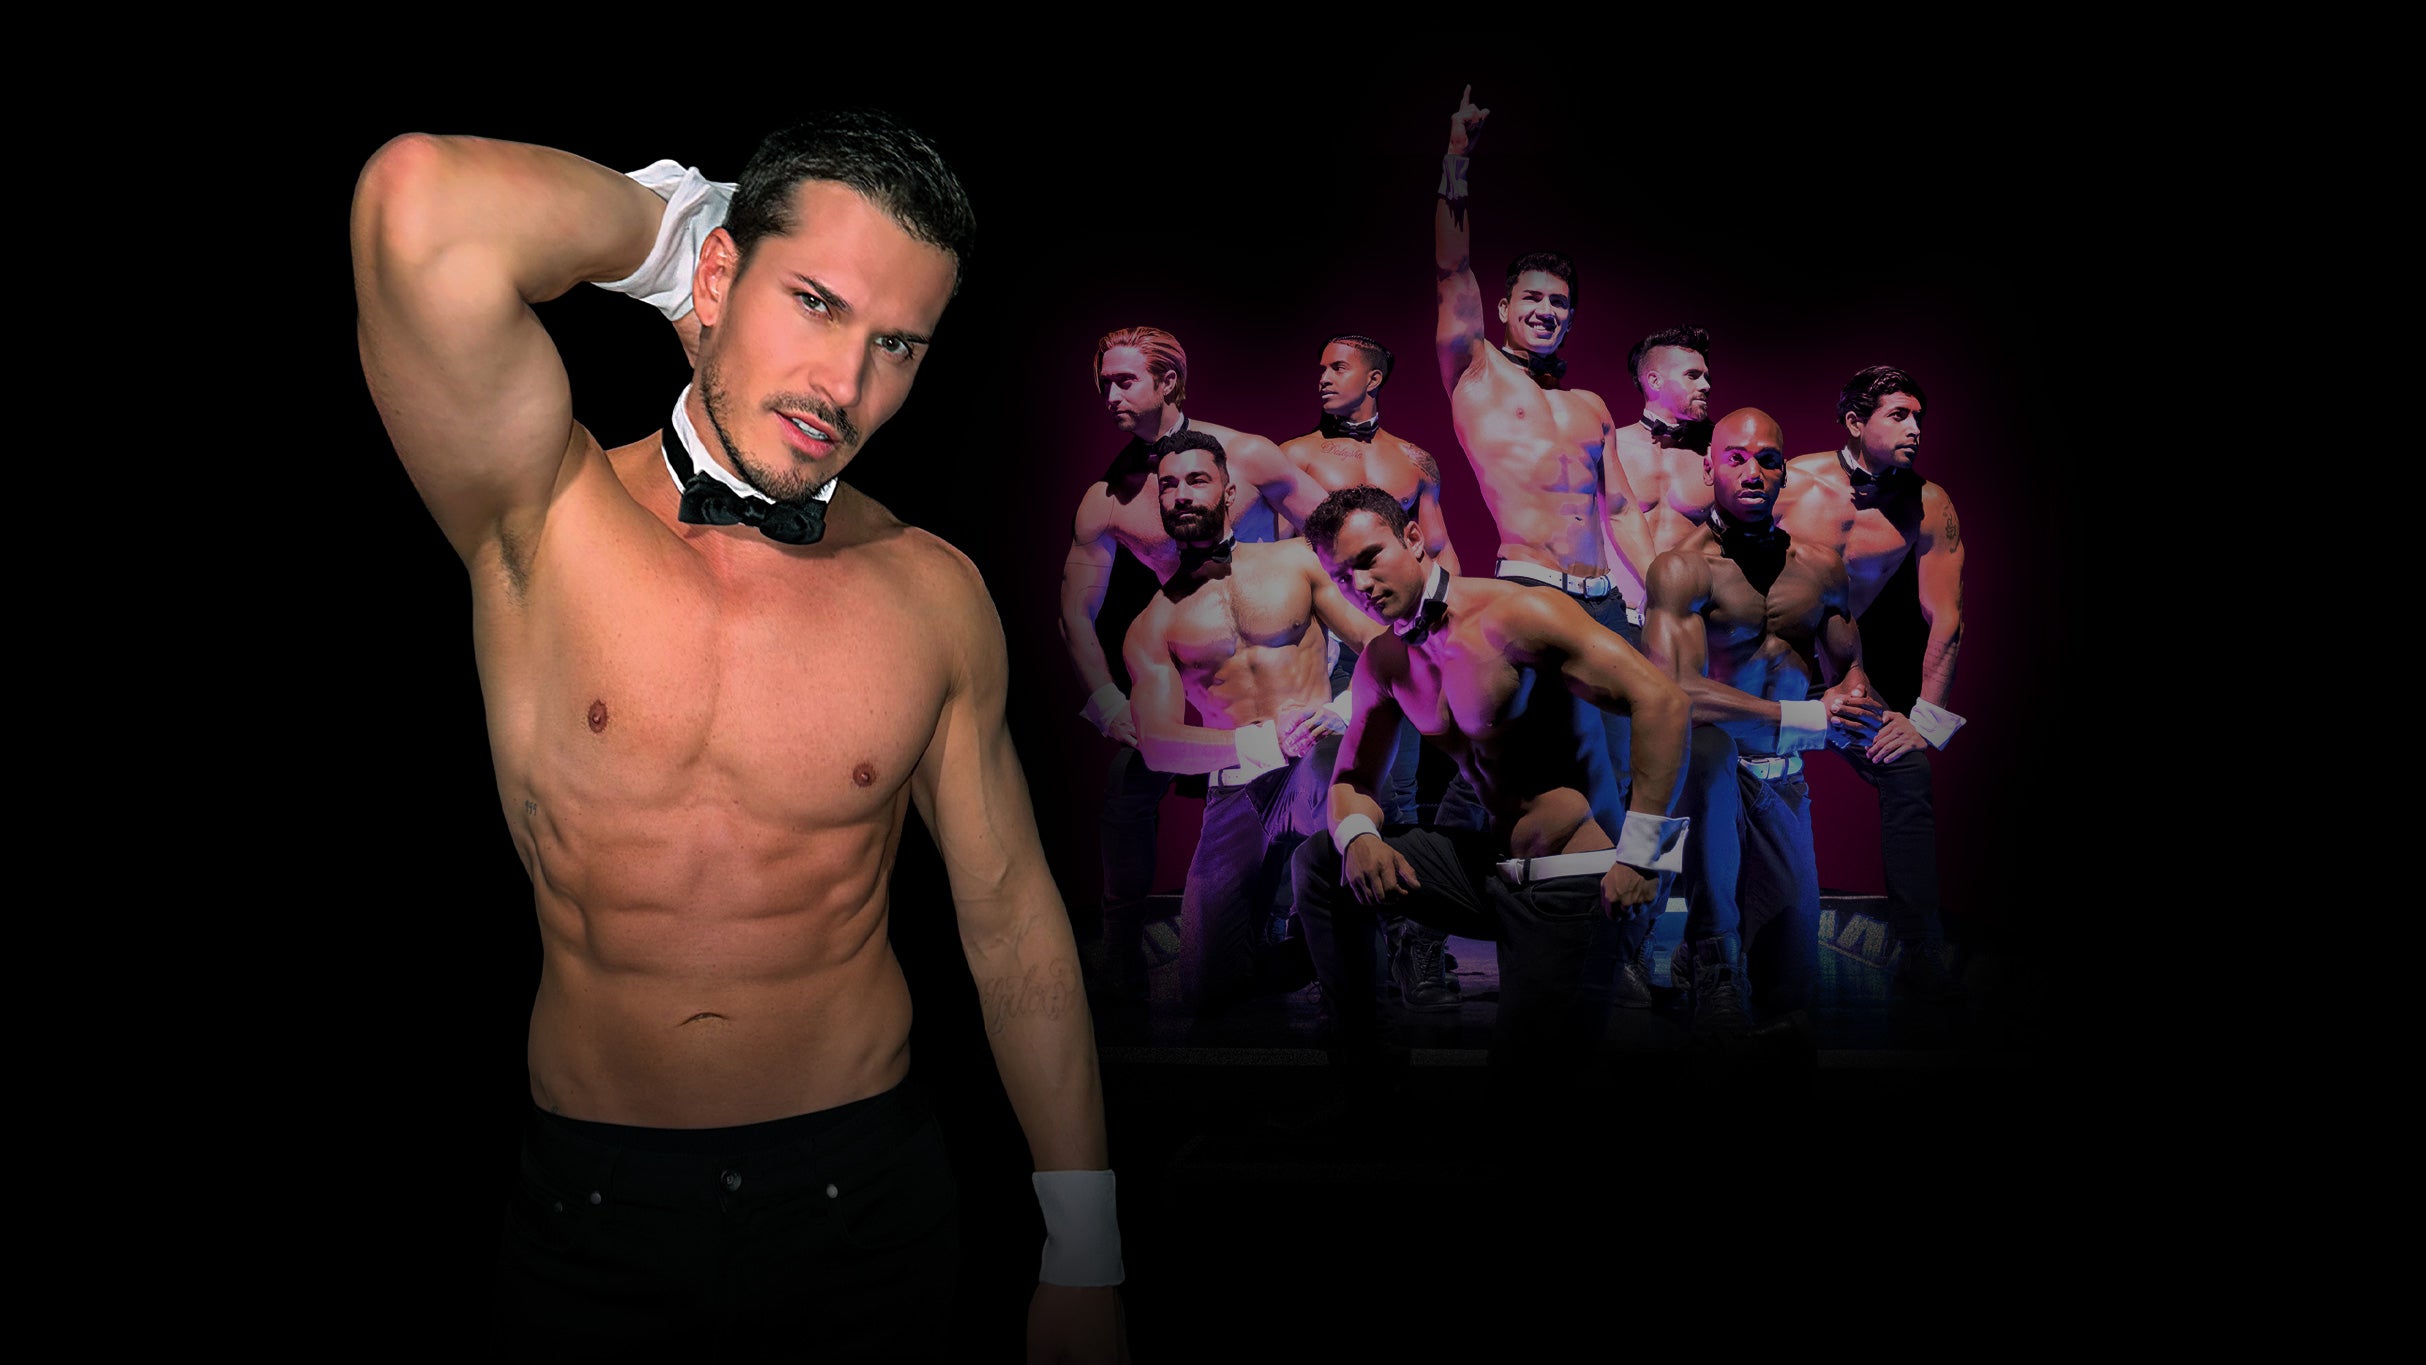 Chippendales featuring Gleb Savchenko in Atlantic City promo photo for Official Platinum presale offer code